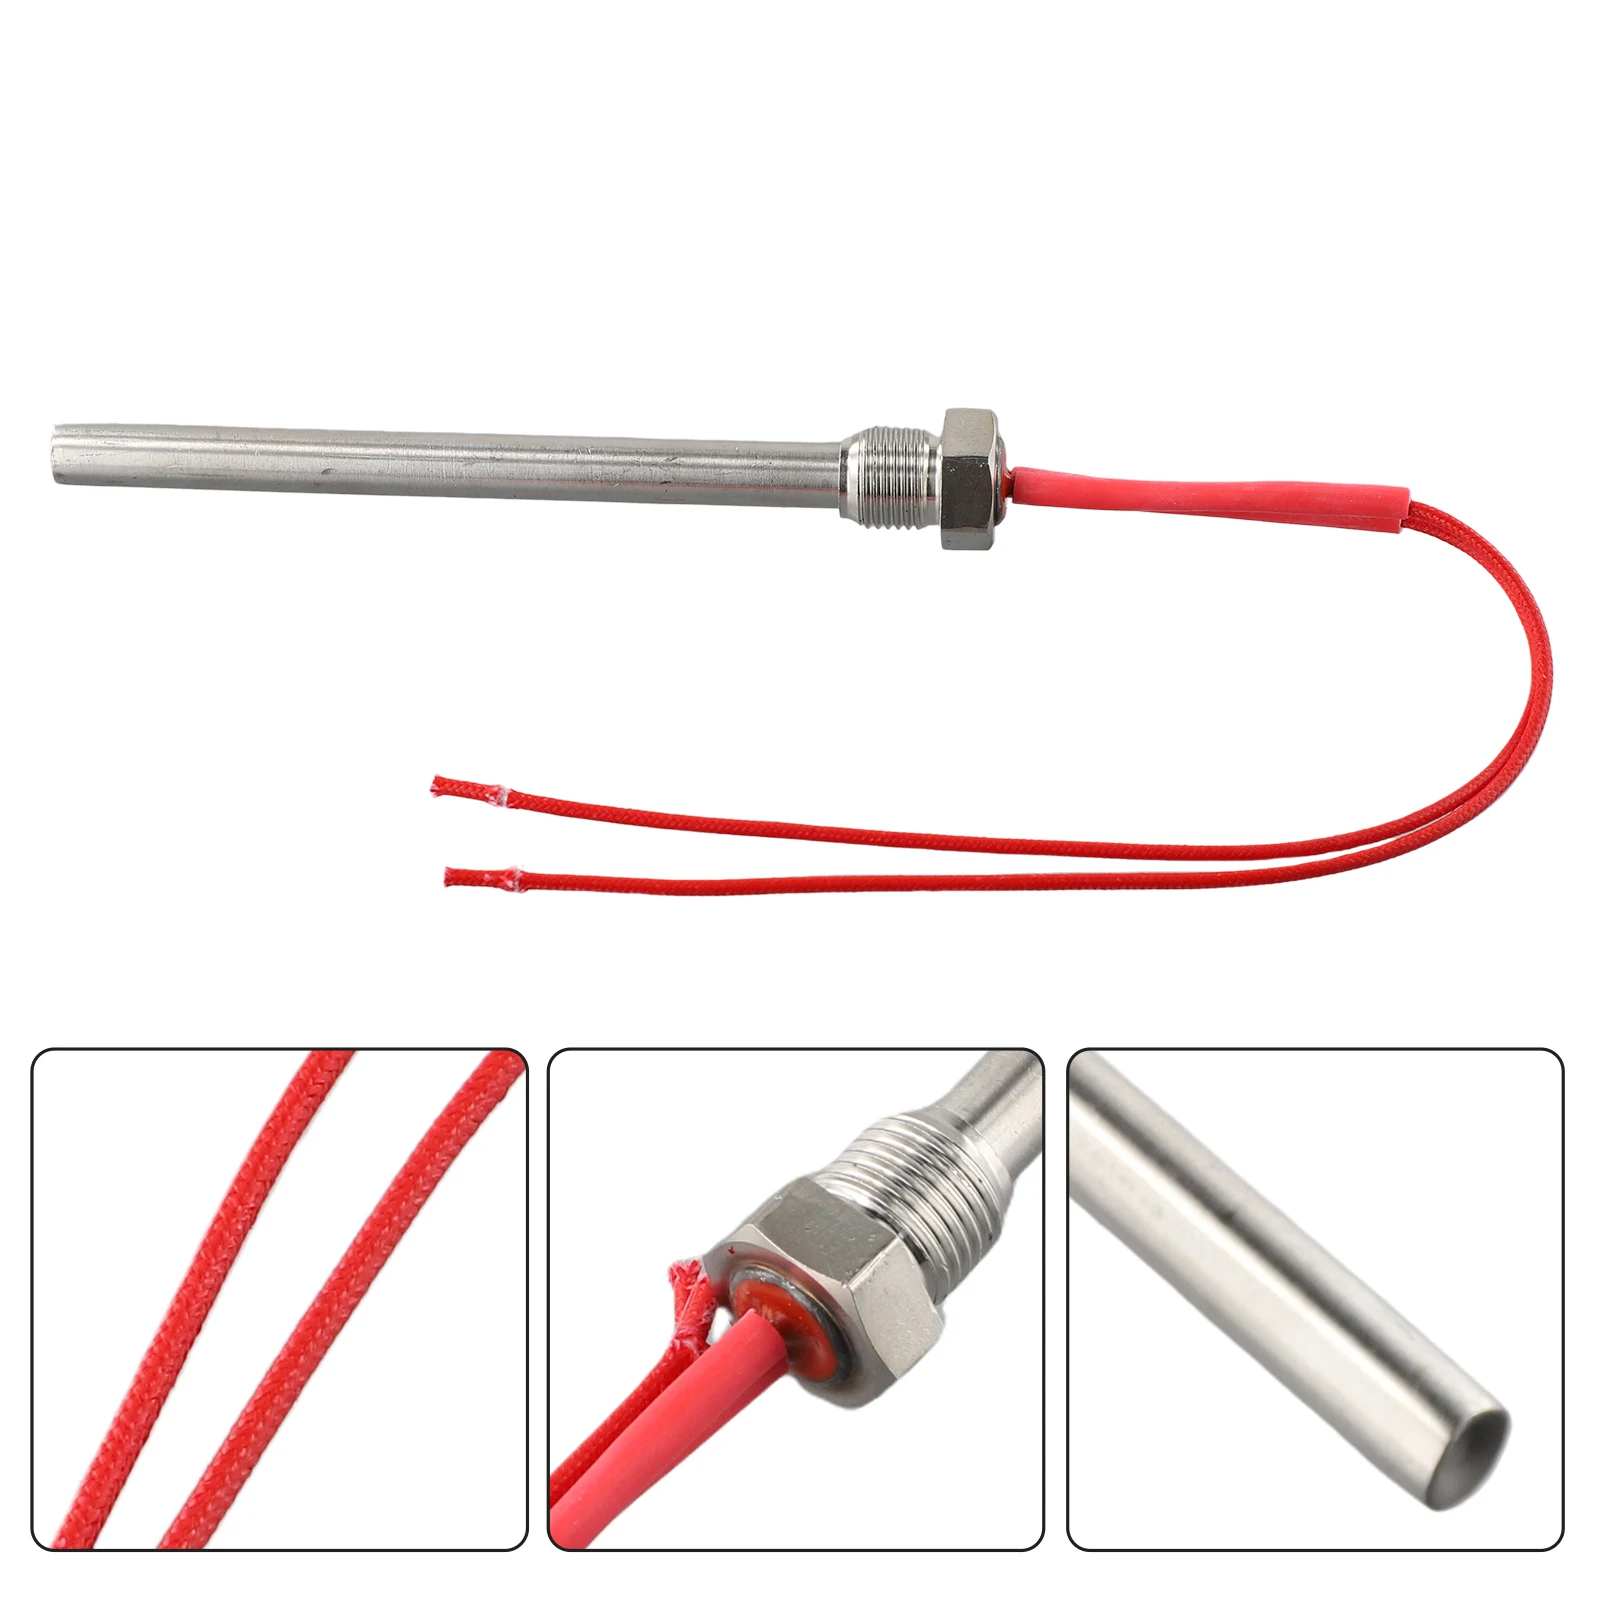 

1 Pcs Igniter Hot Rod 220V Wood Pellet Heating Tube Lgniter For Fireplace Grill Stove Part Household Warming Supplies